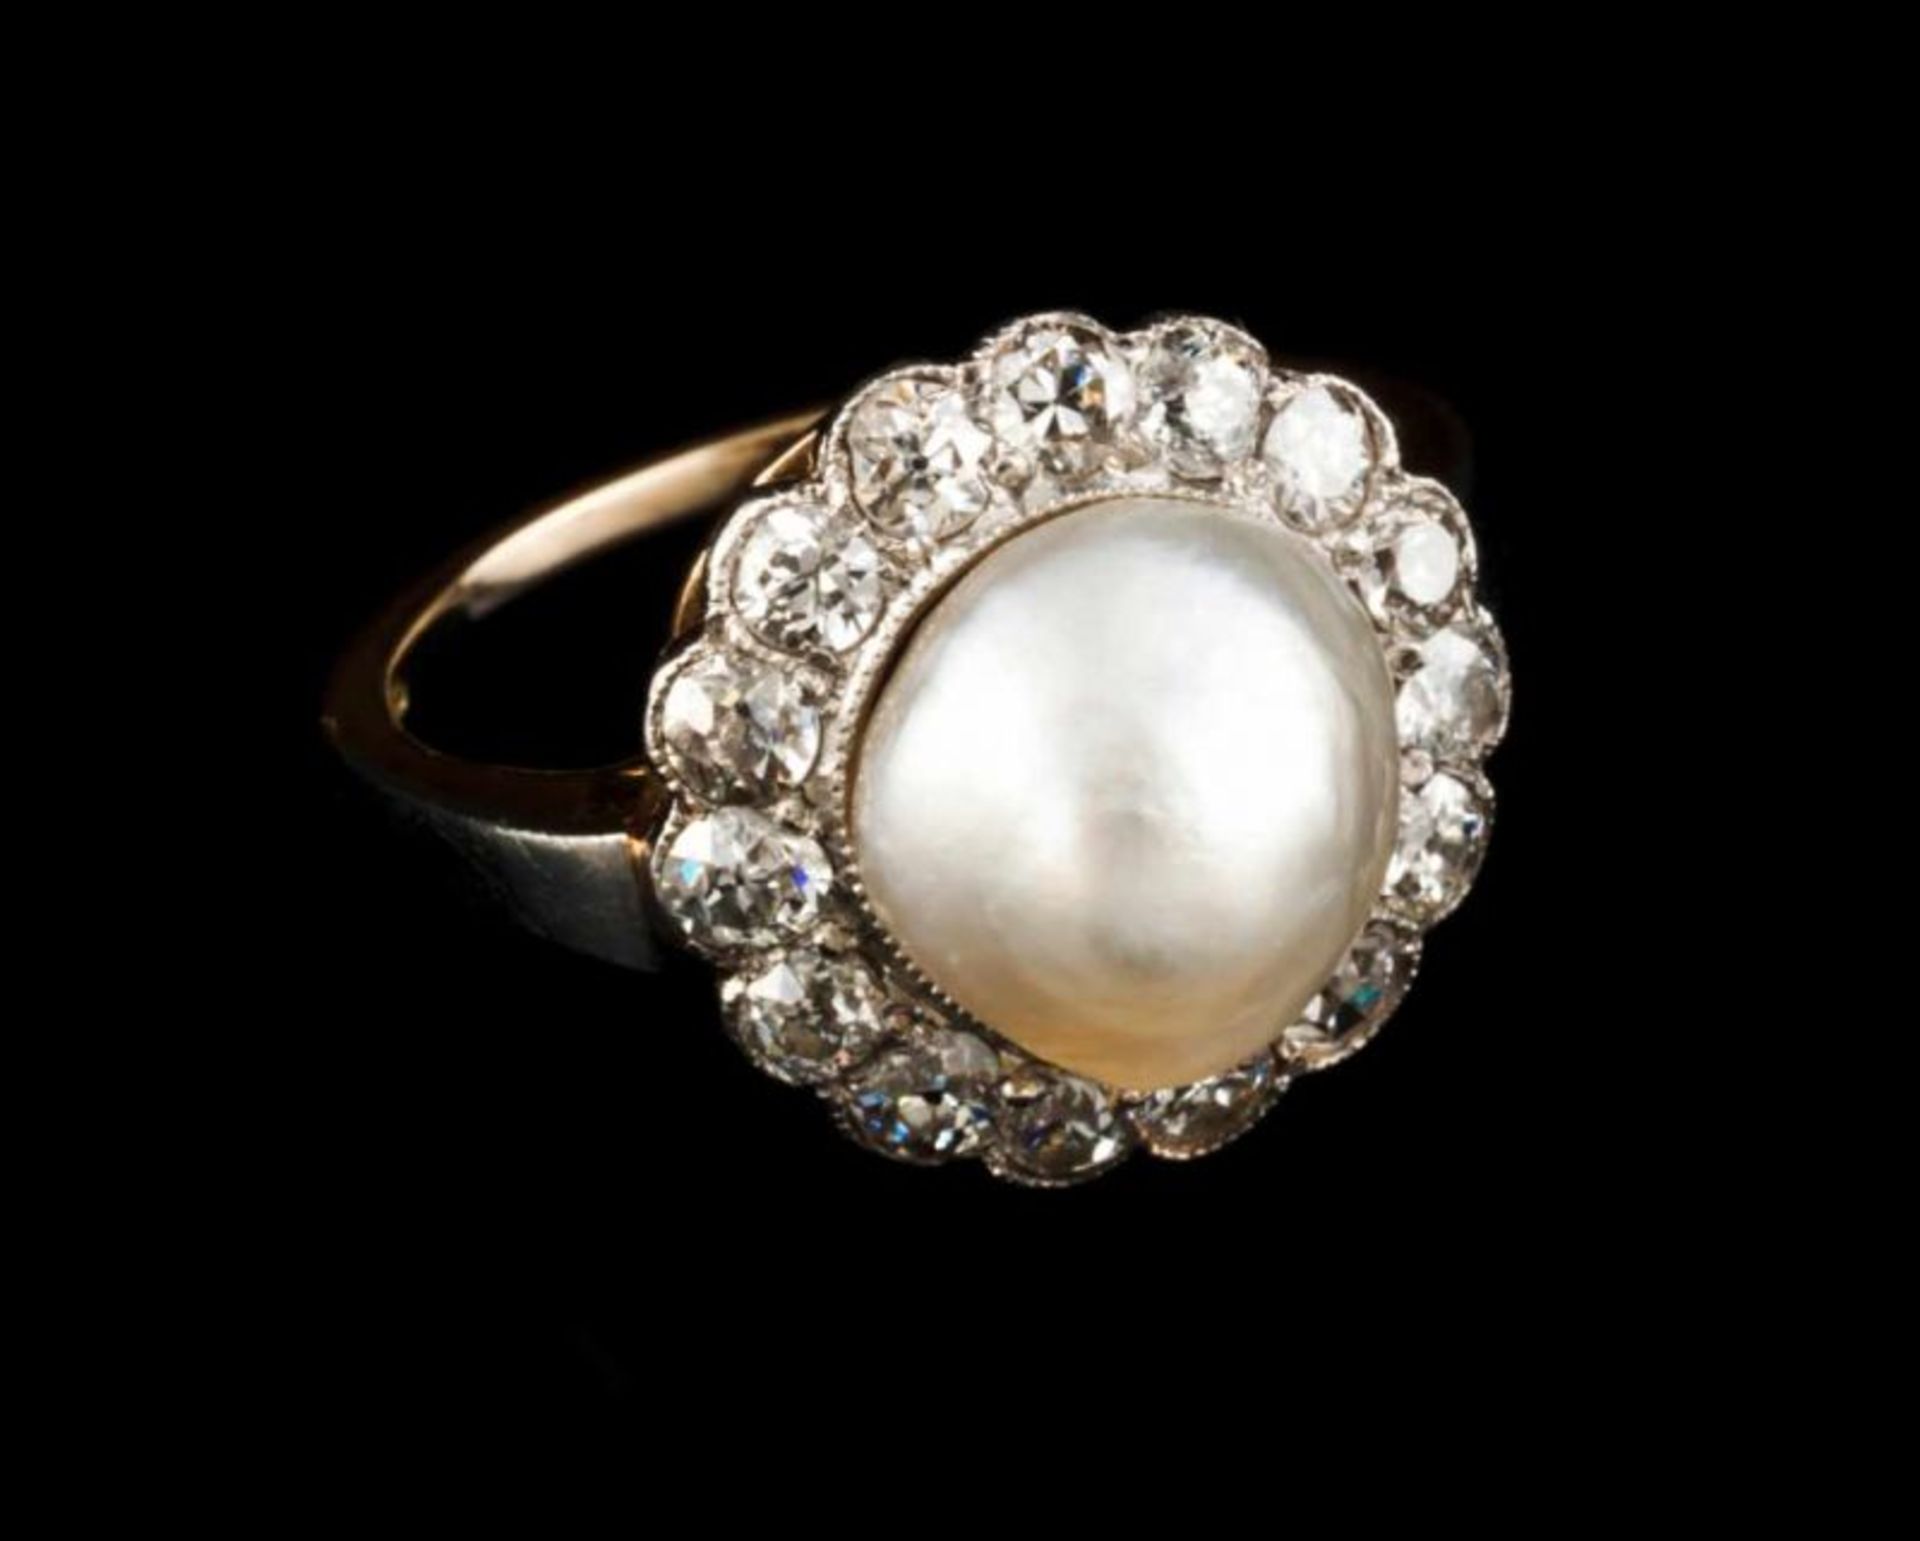 A ring 18kt gold and platinum set with one baroque pearl and 15 old brilliant cut diamonds (ca. 0,